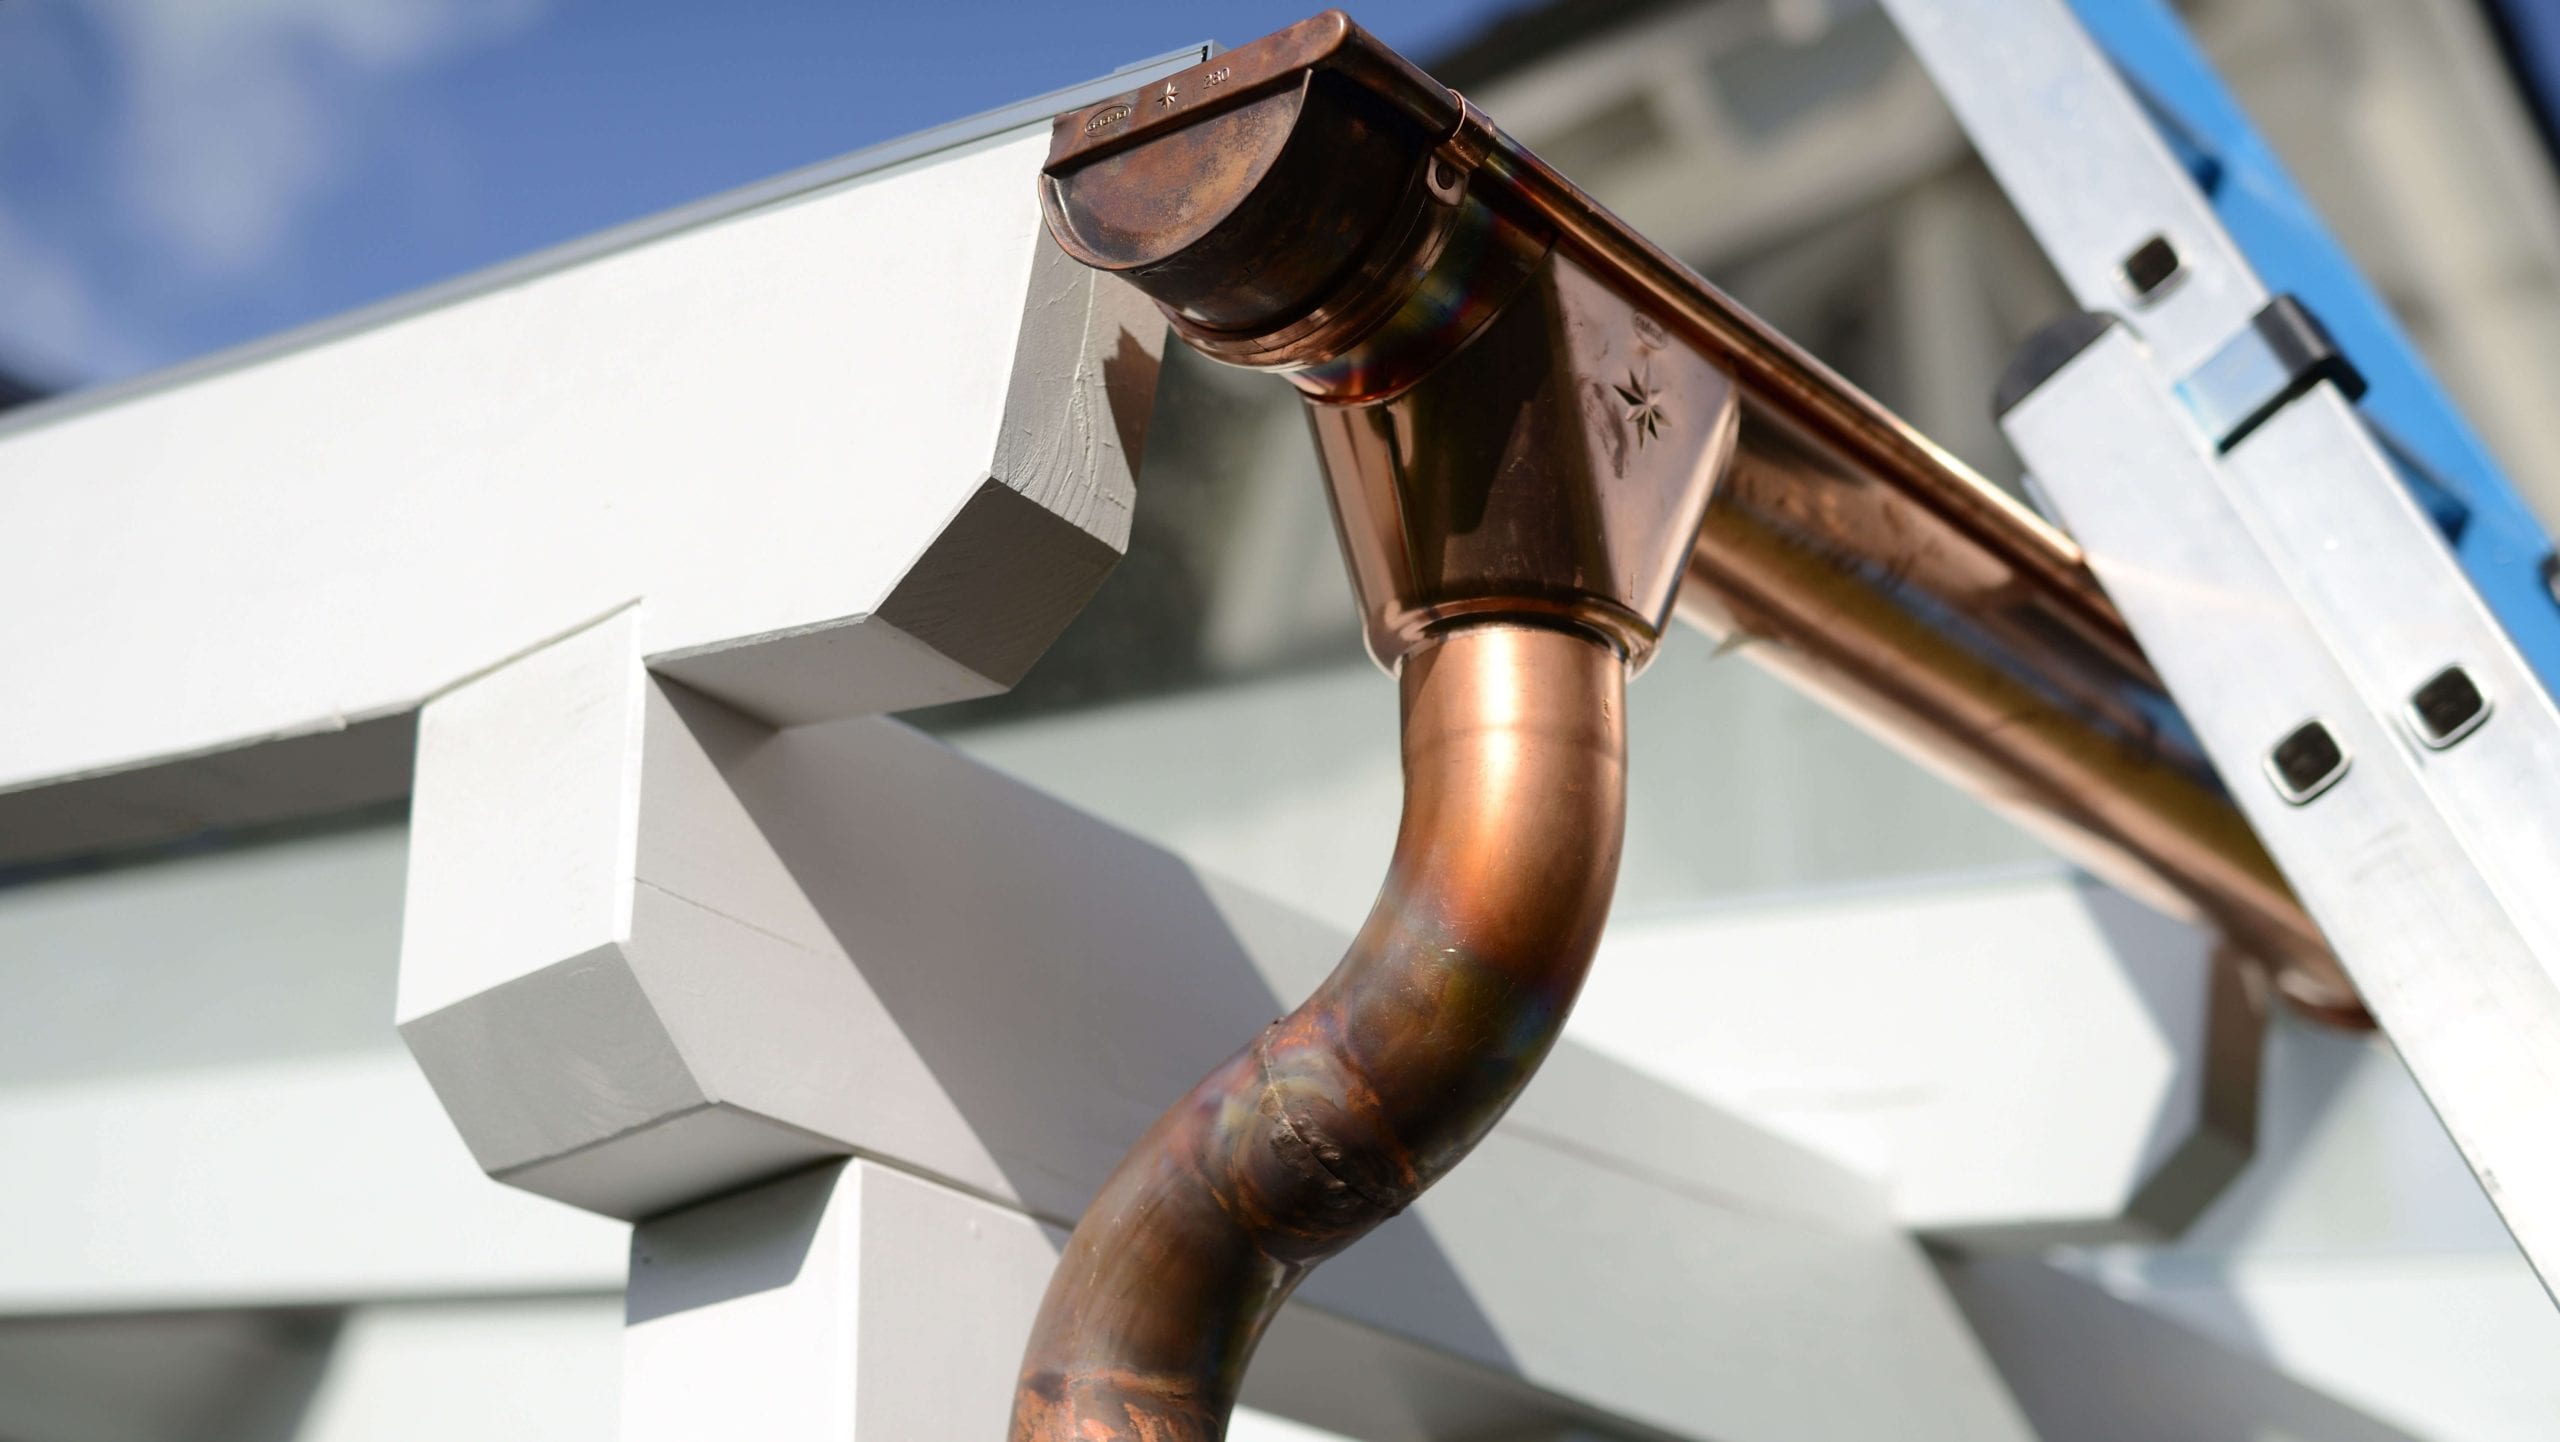 Make your property stand out with copper gutters. Contact for gutter installation in Middletown